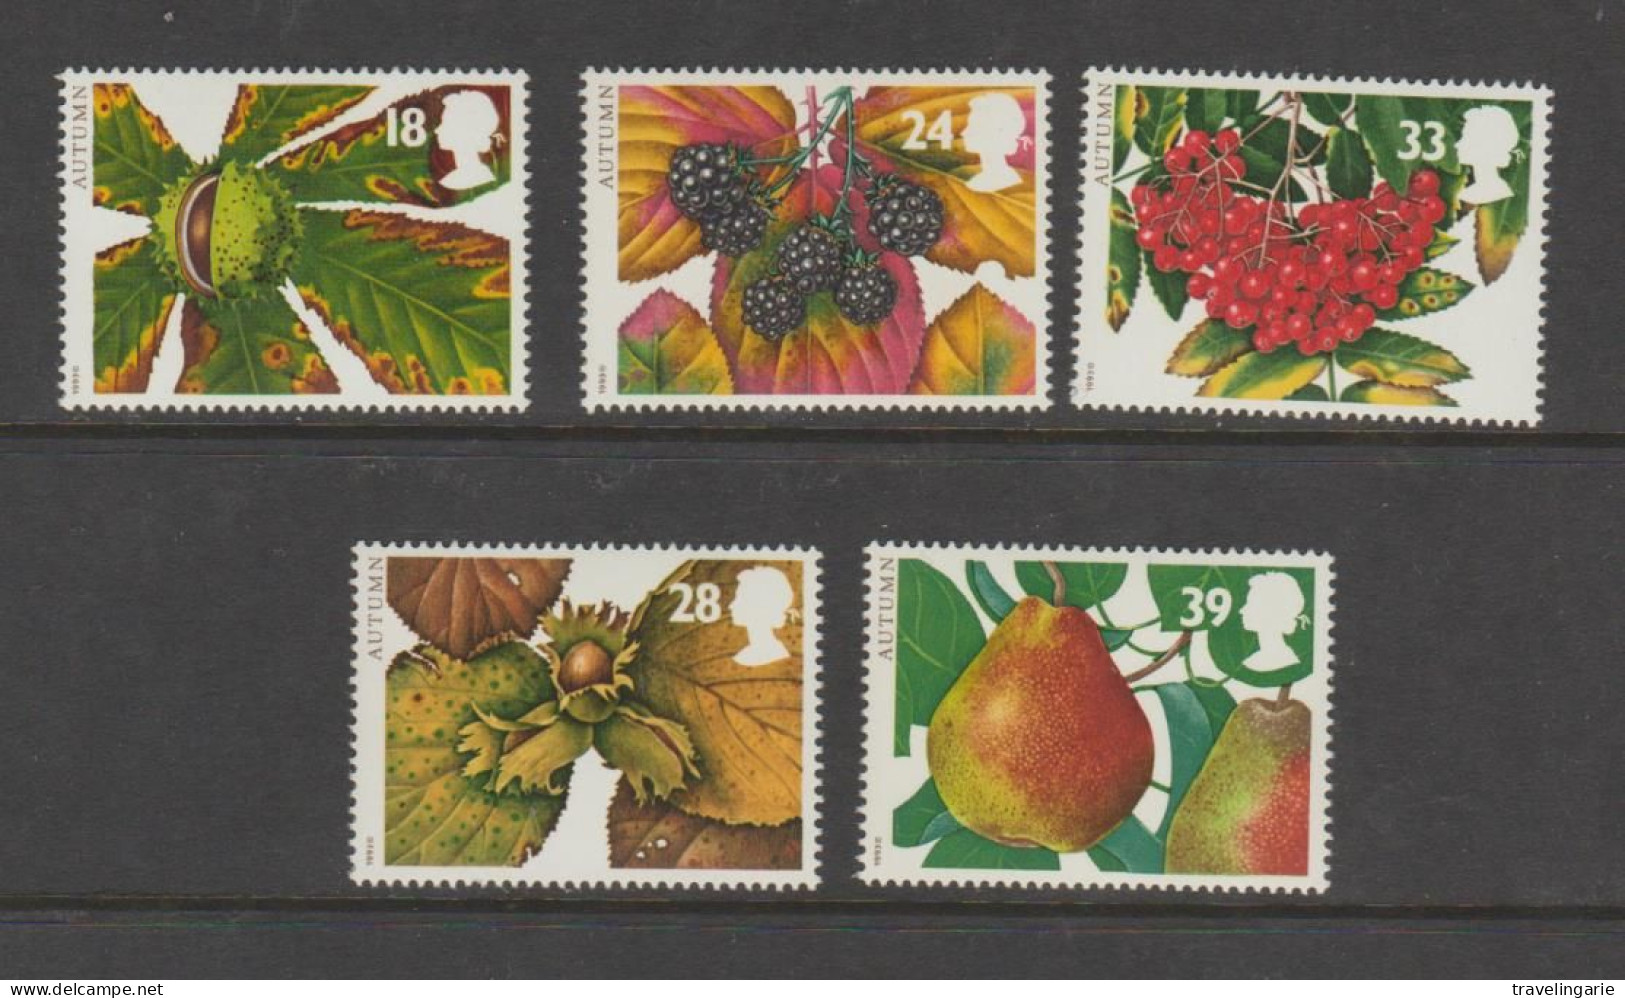 Great Britain 1993 The Four Seasons - Autumn Fruits MNH ** - Fruits